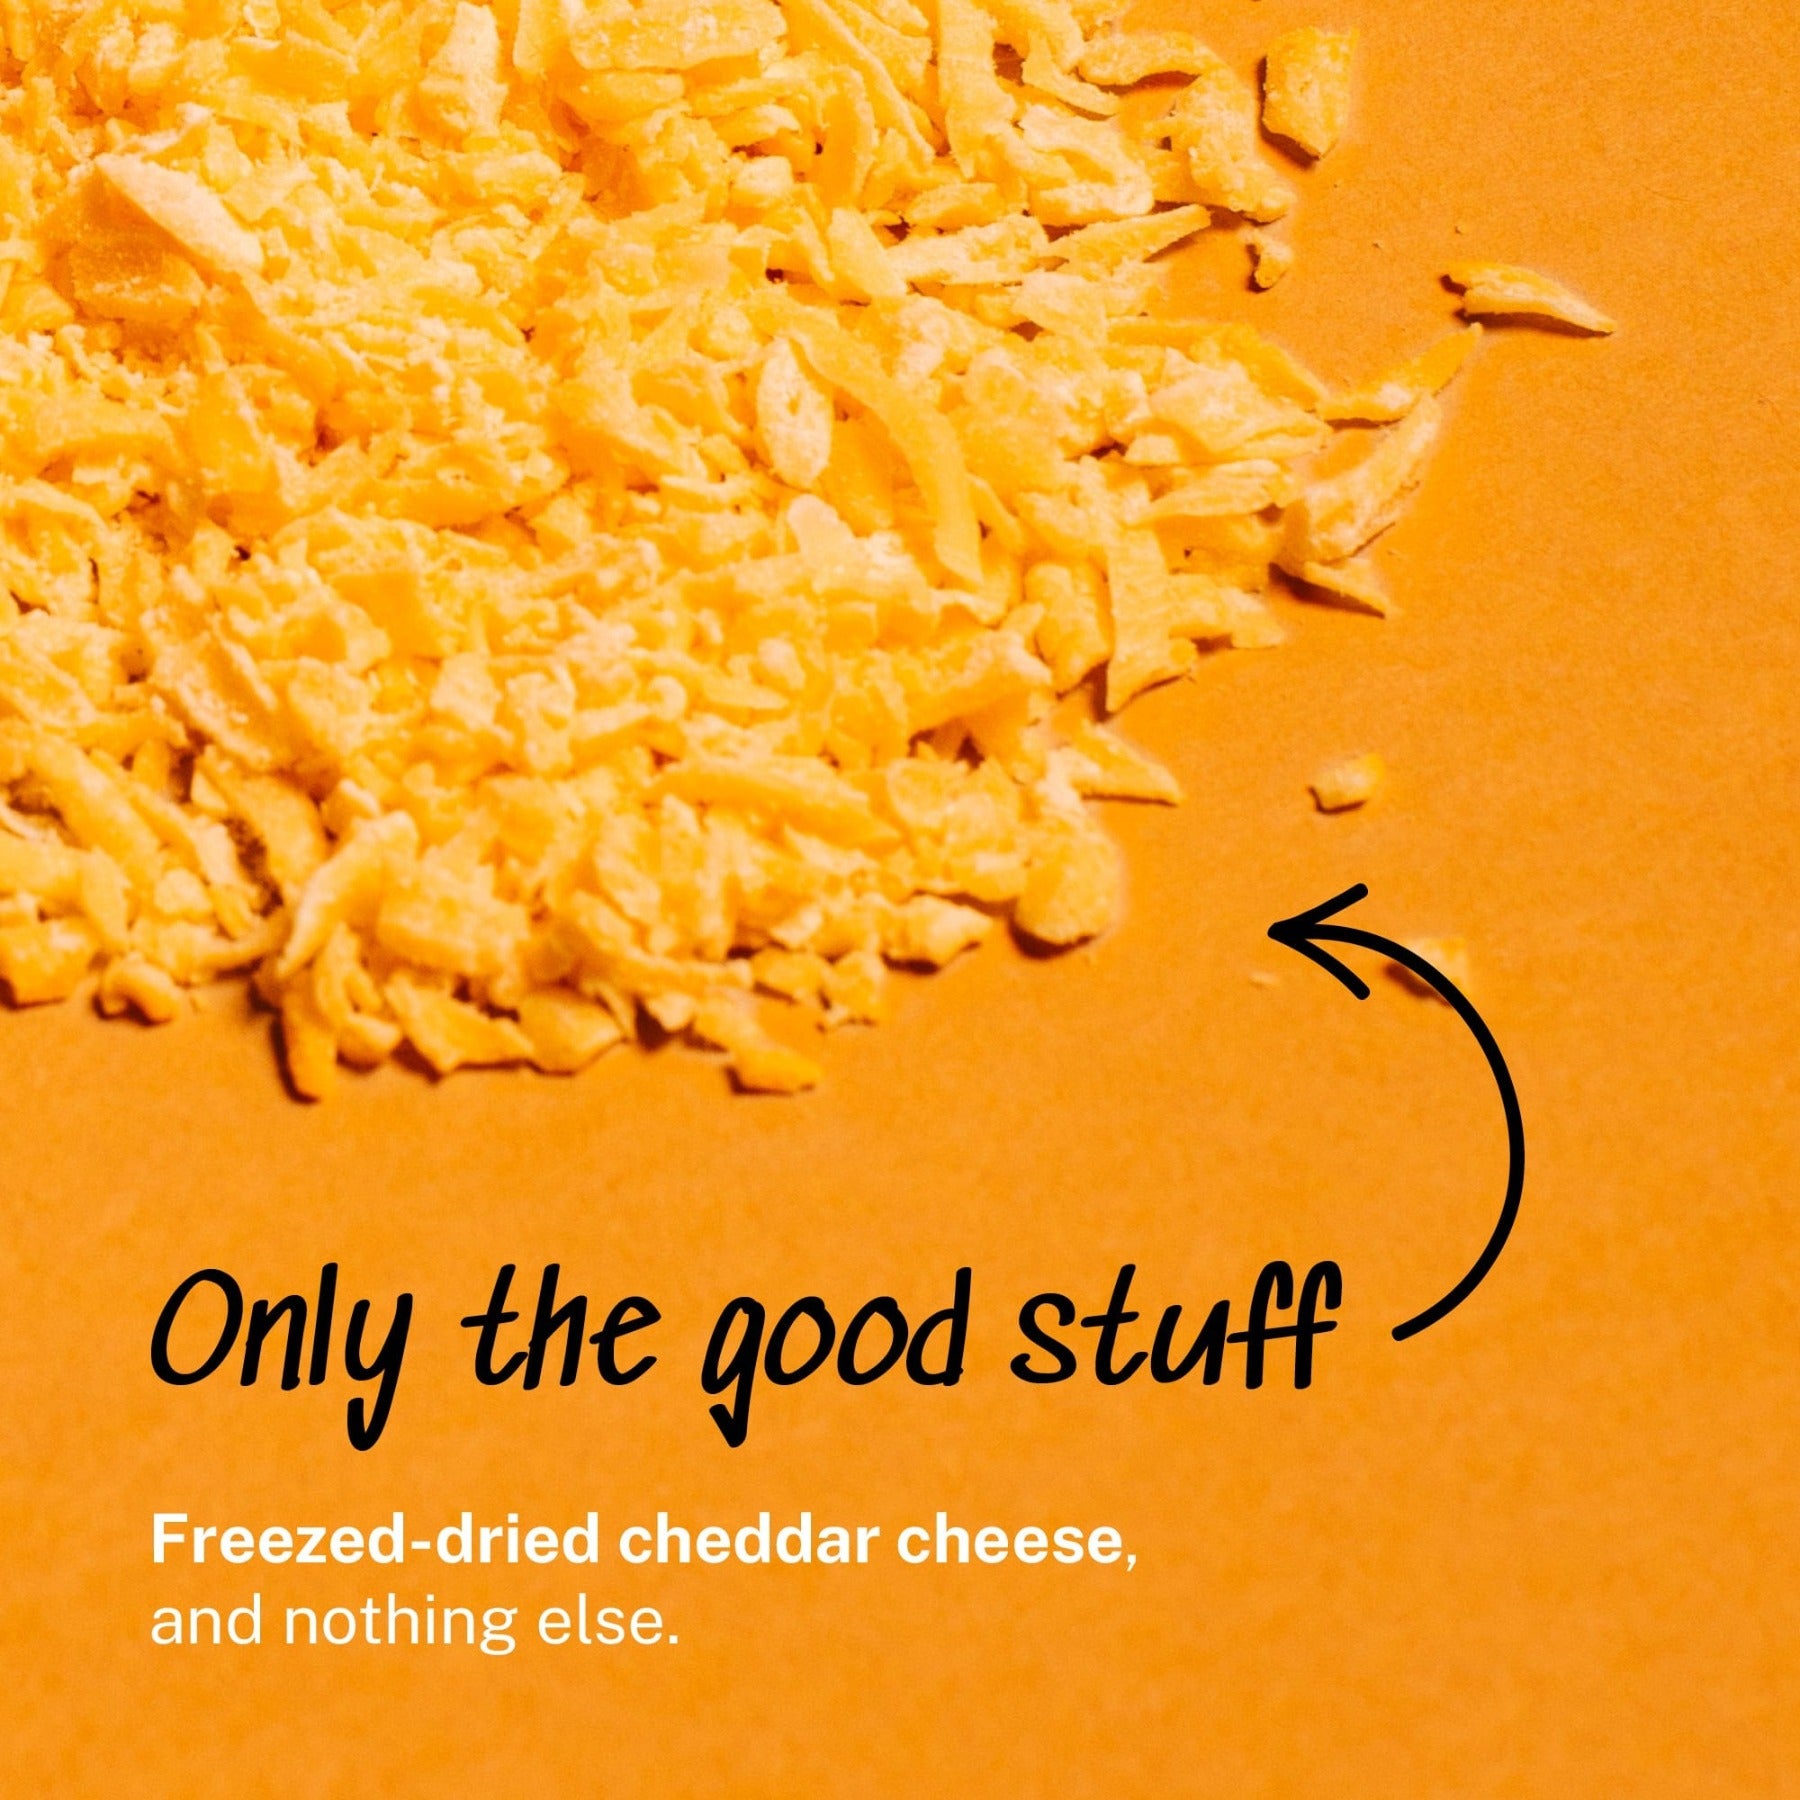 Only the good stuff - freeze-dried cheddar cheese and nothing else